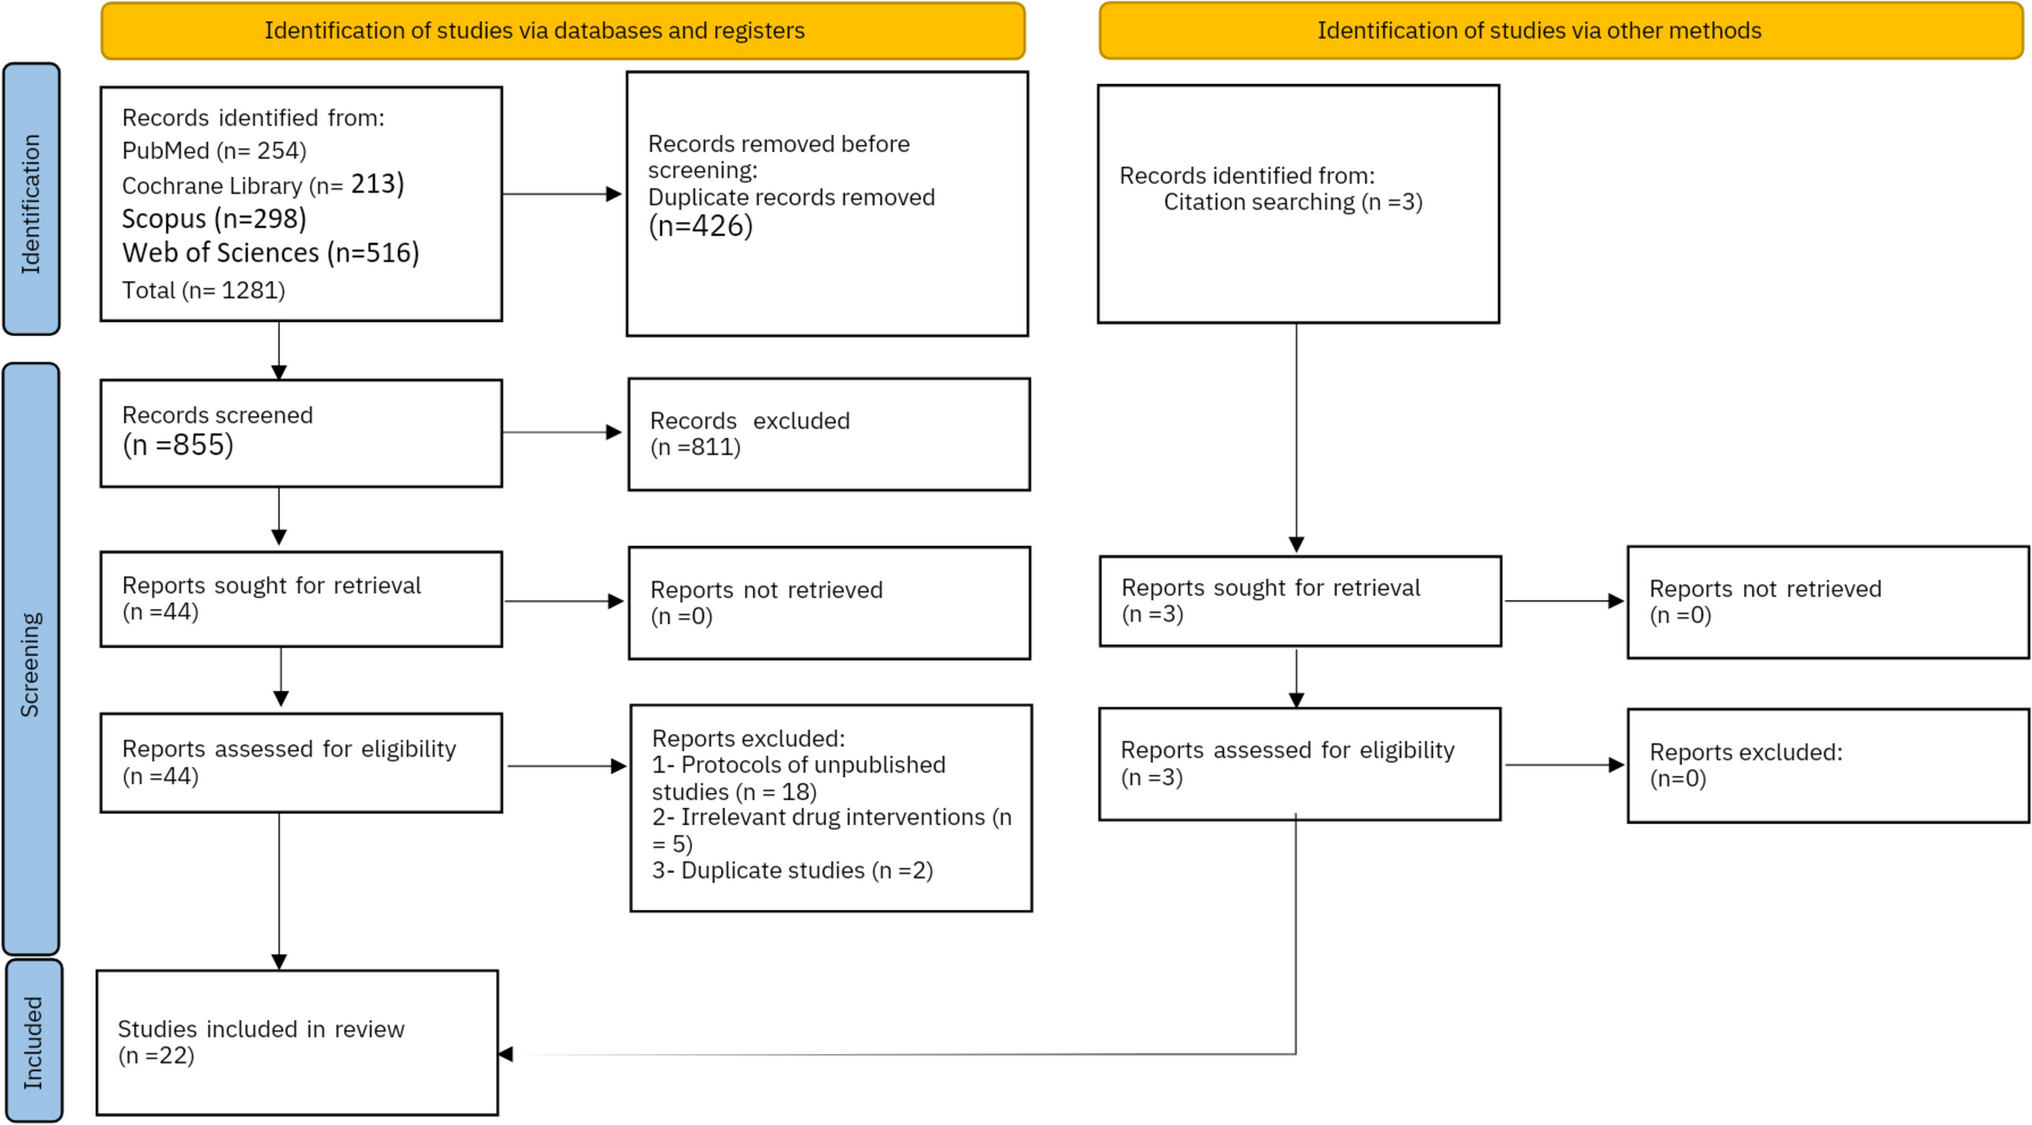 Efficacy and Safety of Ketamine-Dexmedetomidine Versus Ketamine-Propofol Combination for Periprocedural Sedation: A Systematic Review and Meta-analysis